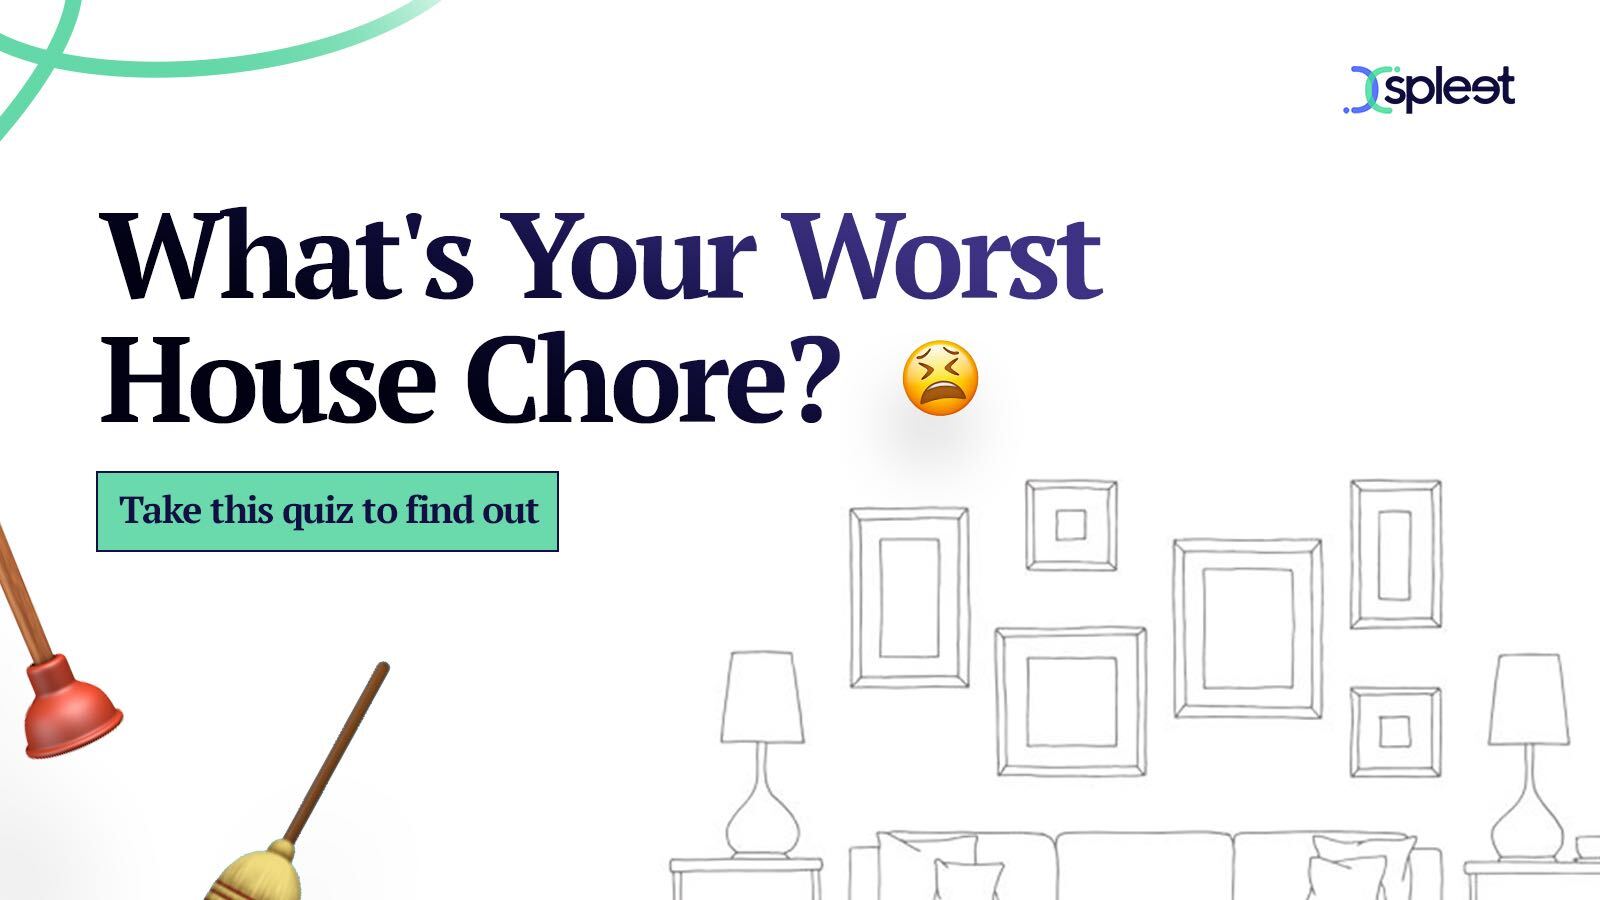 Answer a few questions and we'll guess which house chore you hate the most.